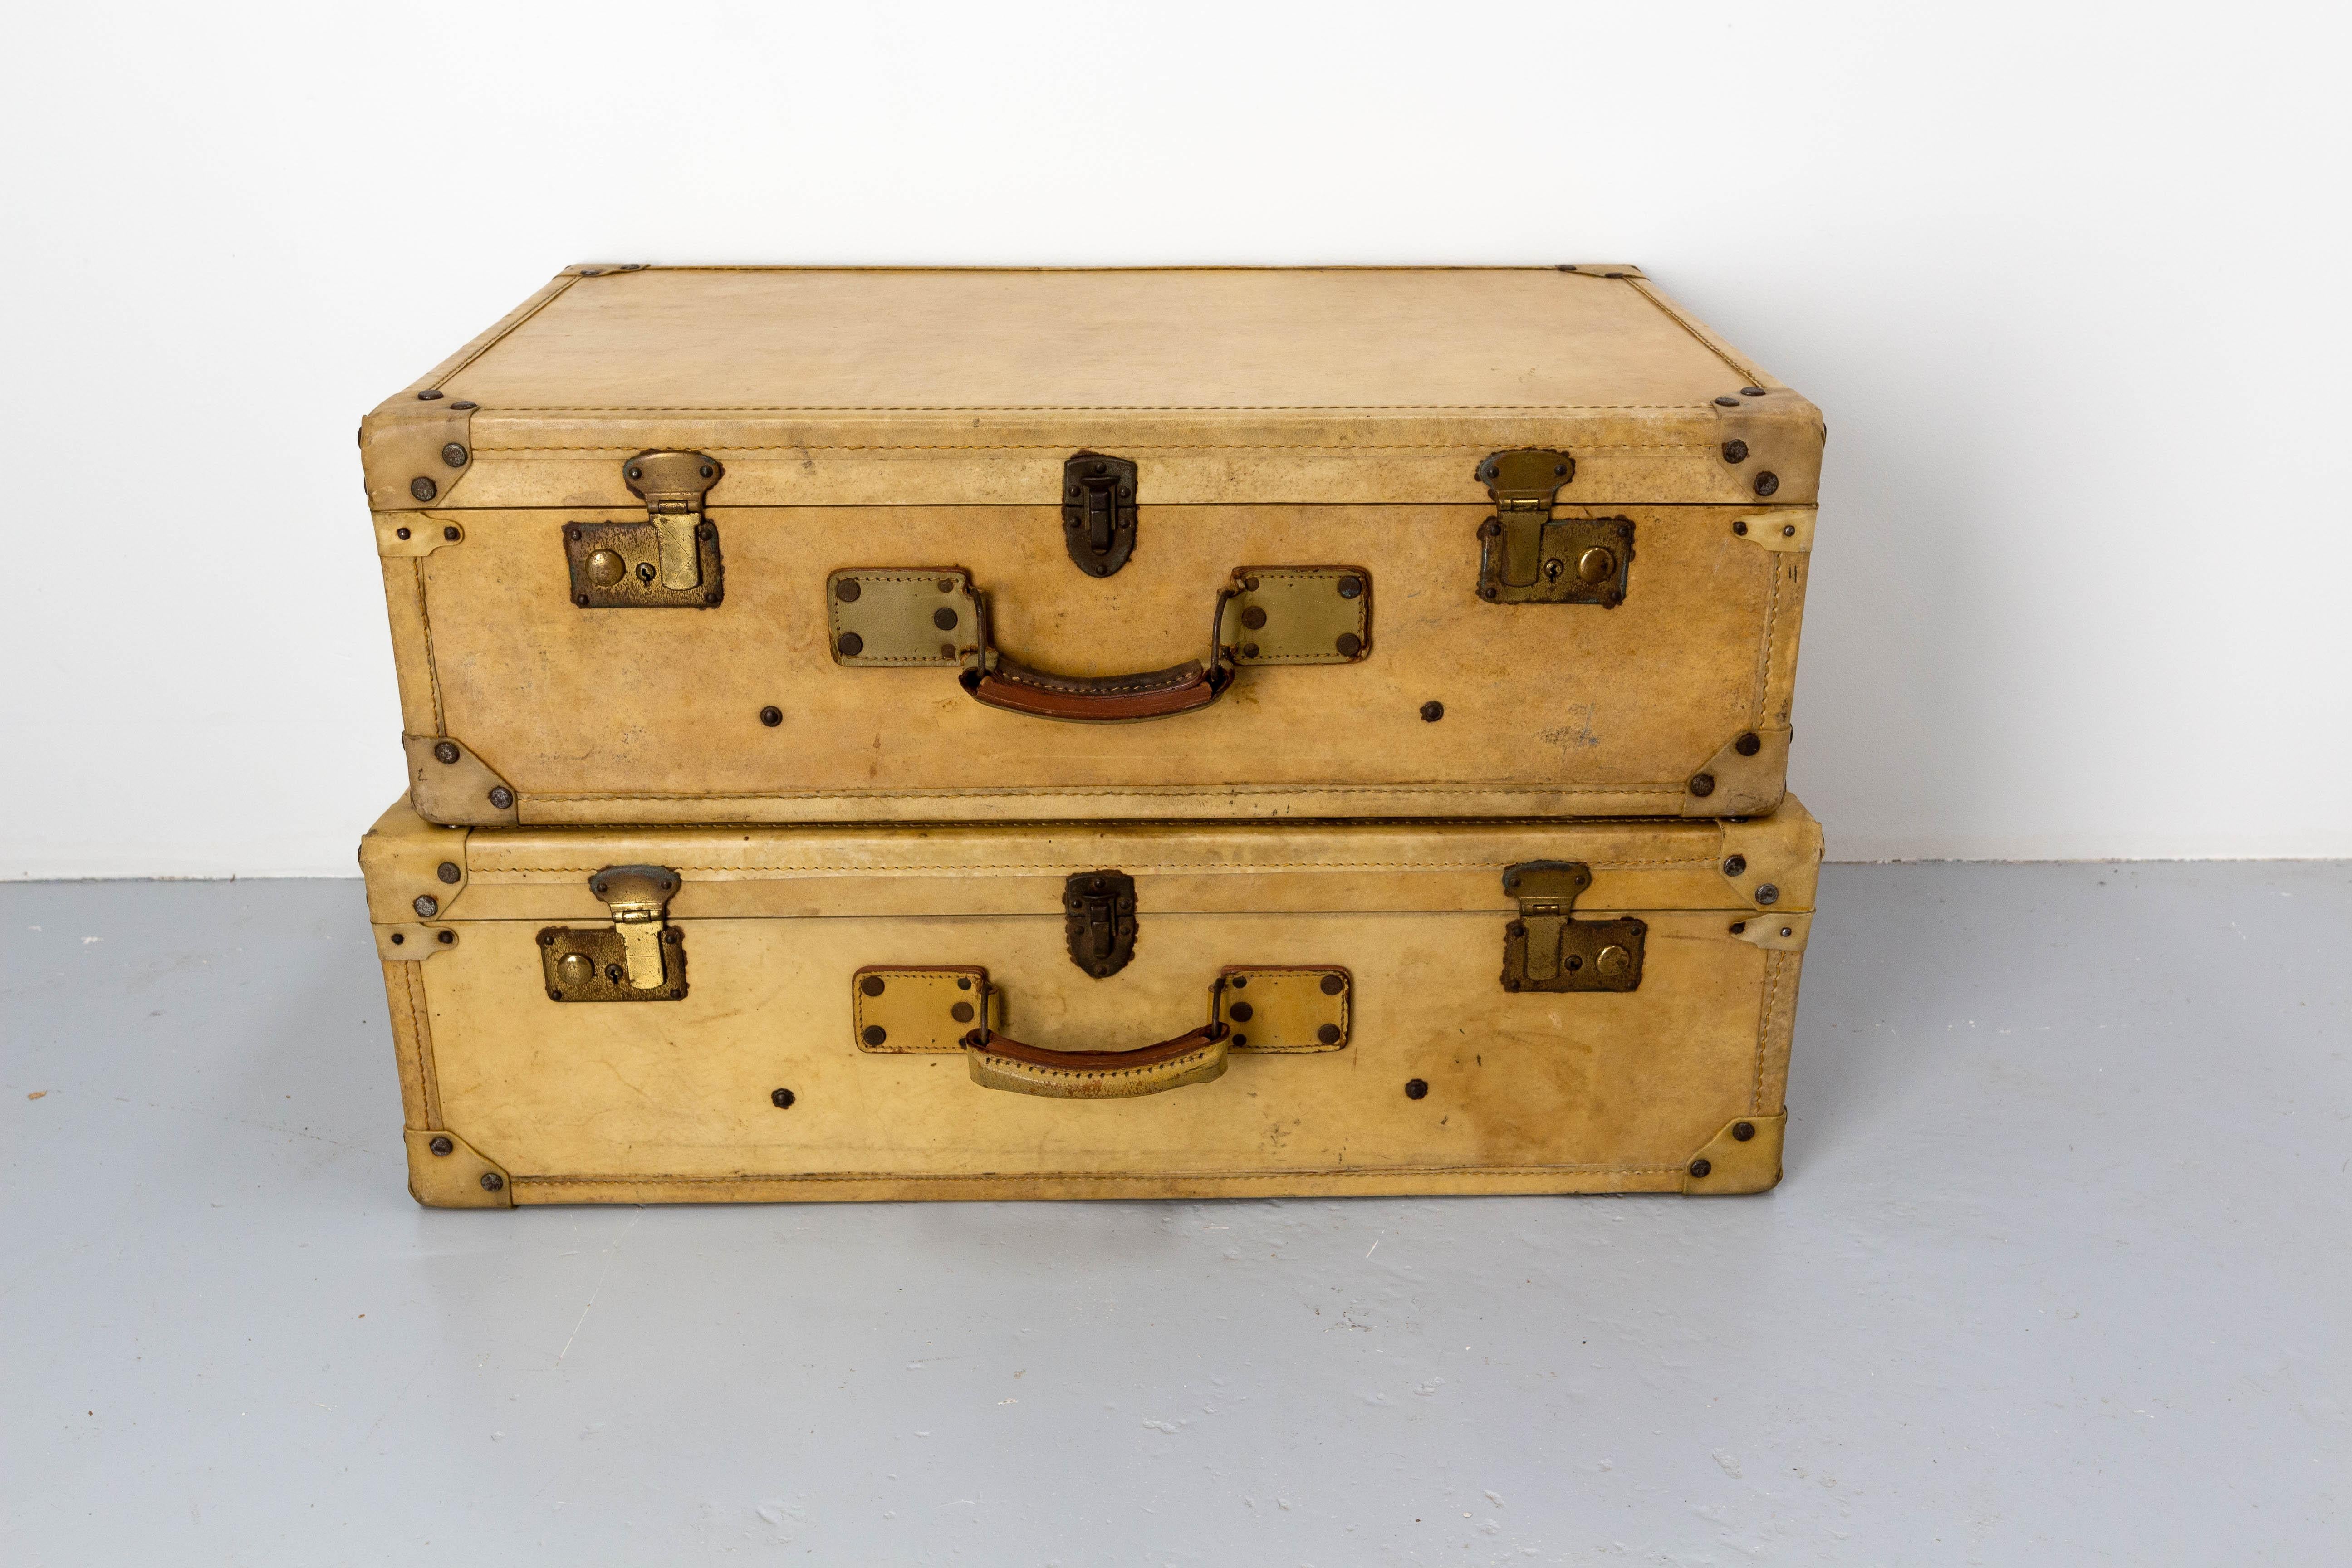 French vintage pair of suit cases, made of parchment and fabric, with label holder.
The address of the original owner is wrotten inside each suit case.
Good vintage condition.
Charming patina.


Shipping:
50 / 81 / 48 cm 9 Kg.